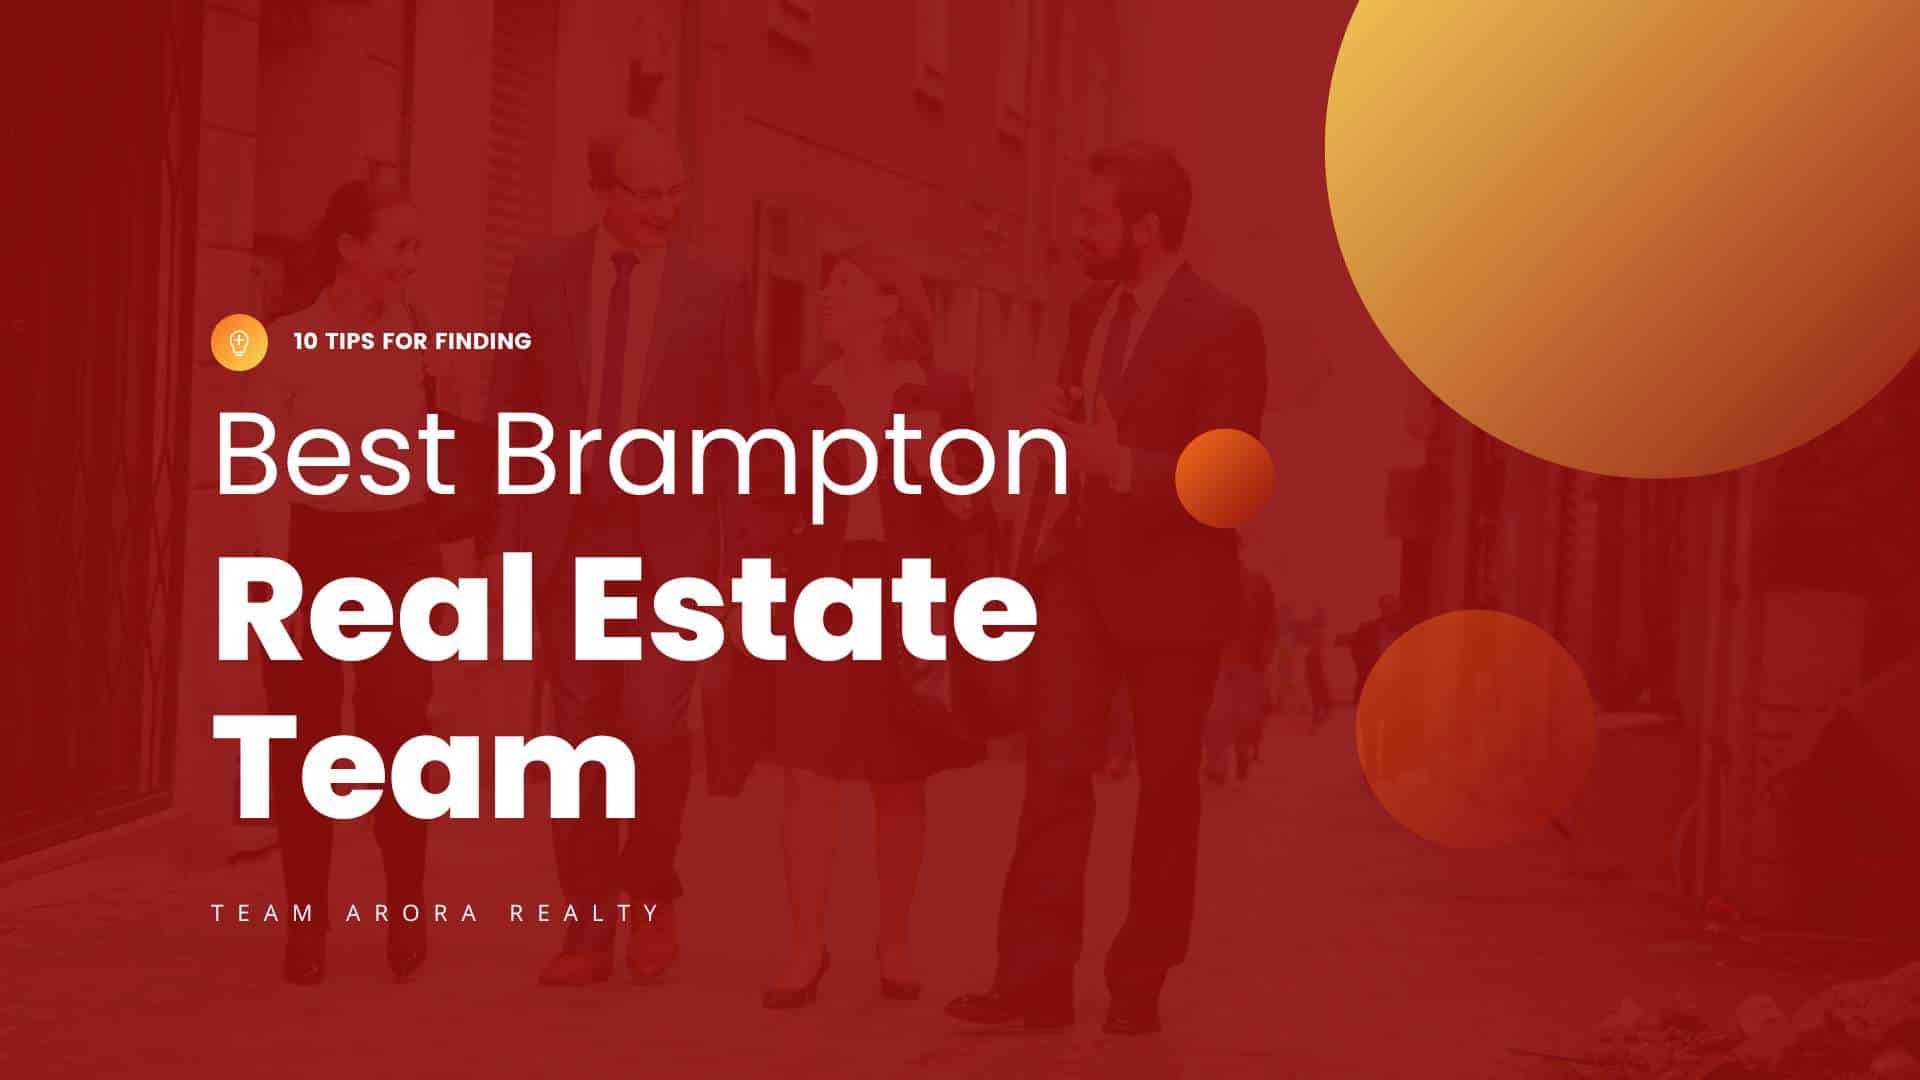 10 Tips For Finding The Best Brampton Real Estate Team